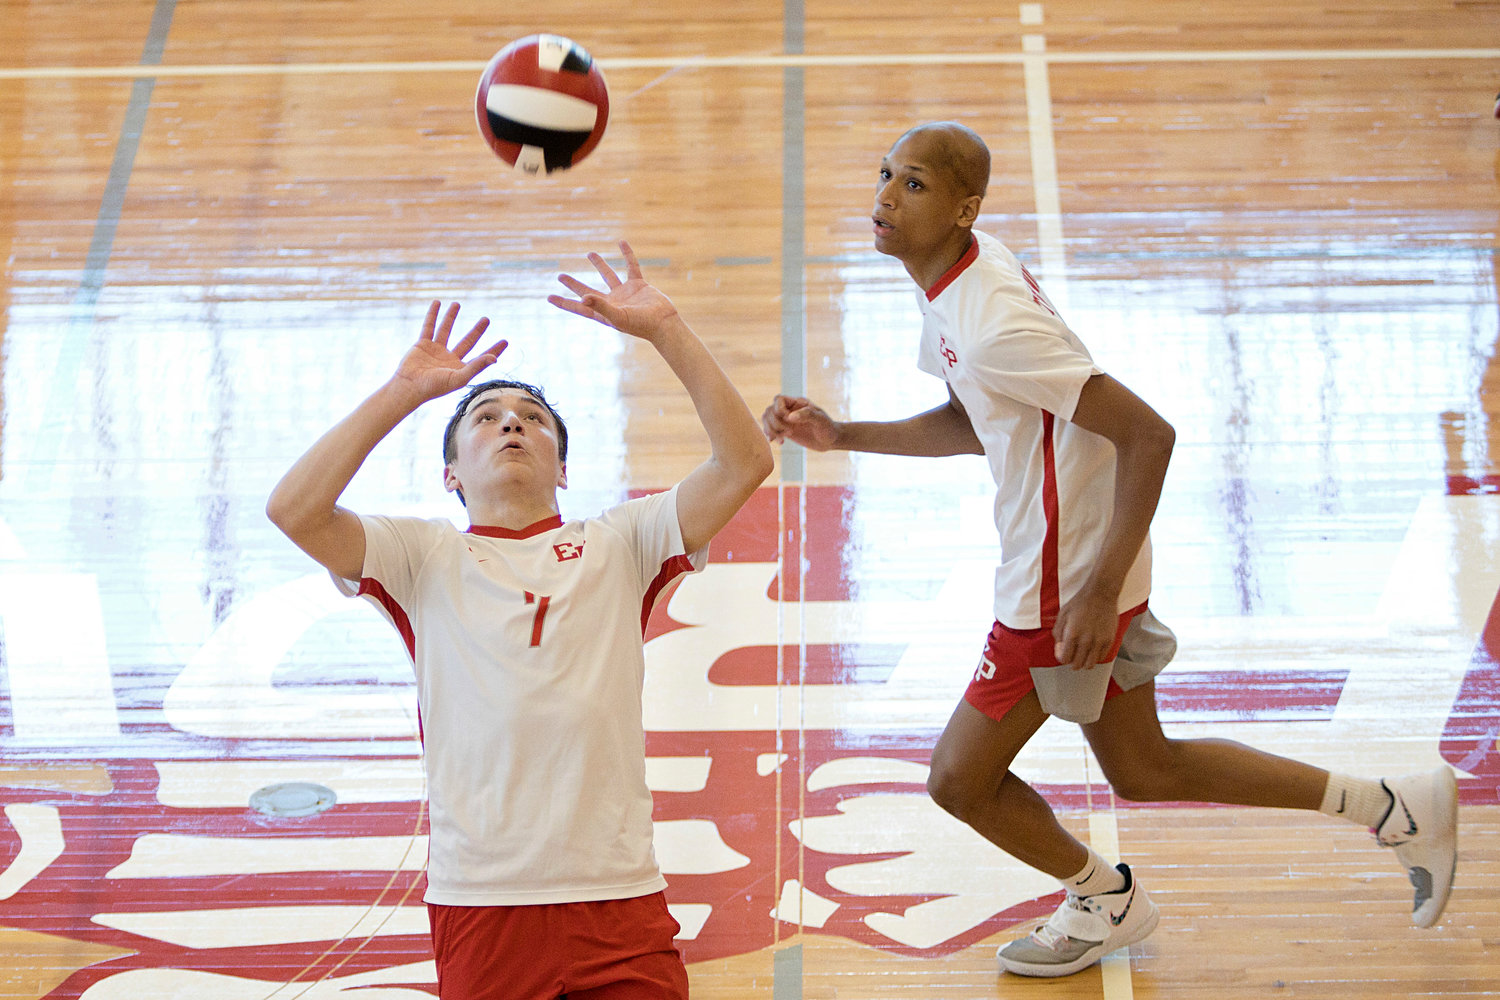 East Providence High School’s D.J. Lepine sets the ball as teammate, Jason Caldwell gets ready for the spike.